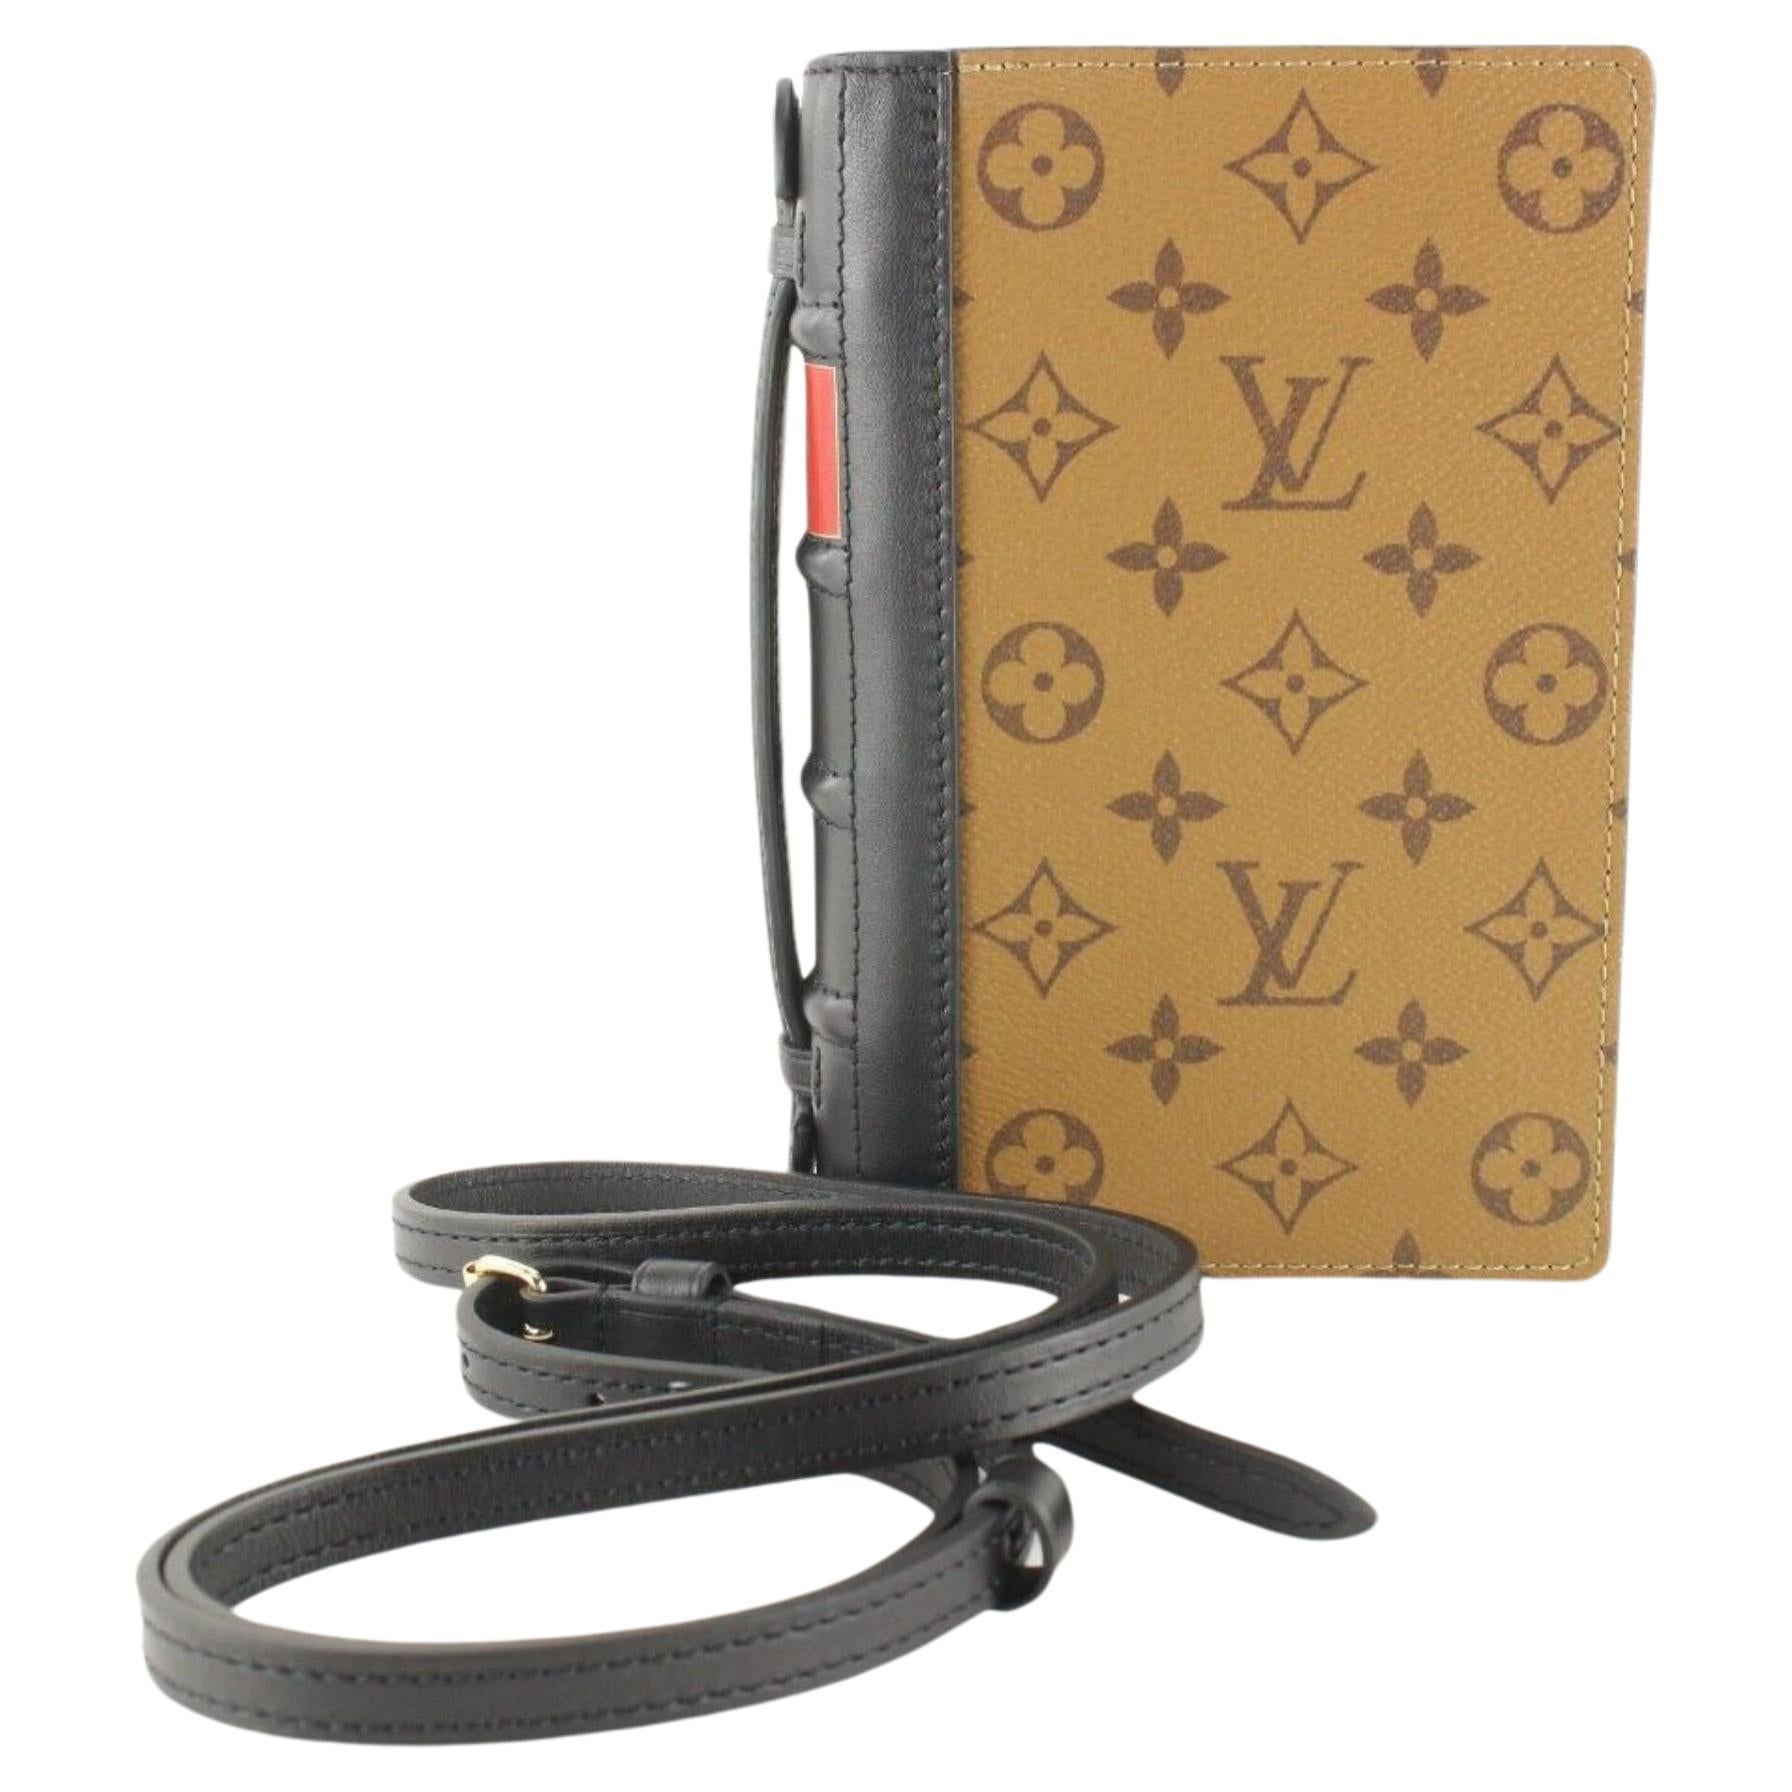 Louis Vuitton Book Bag - 3 For Sale on 1stDibs